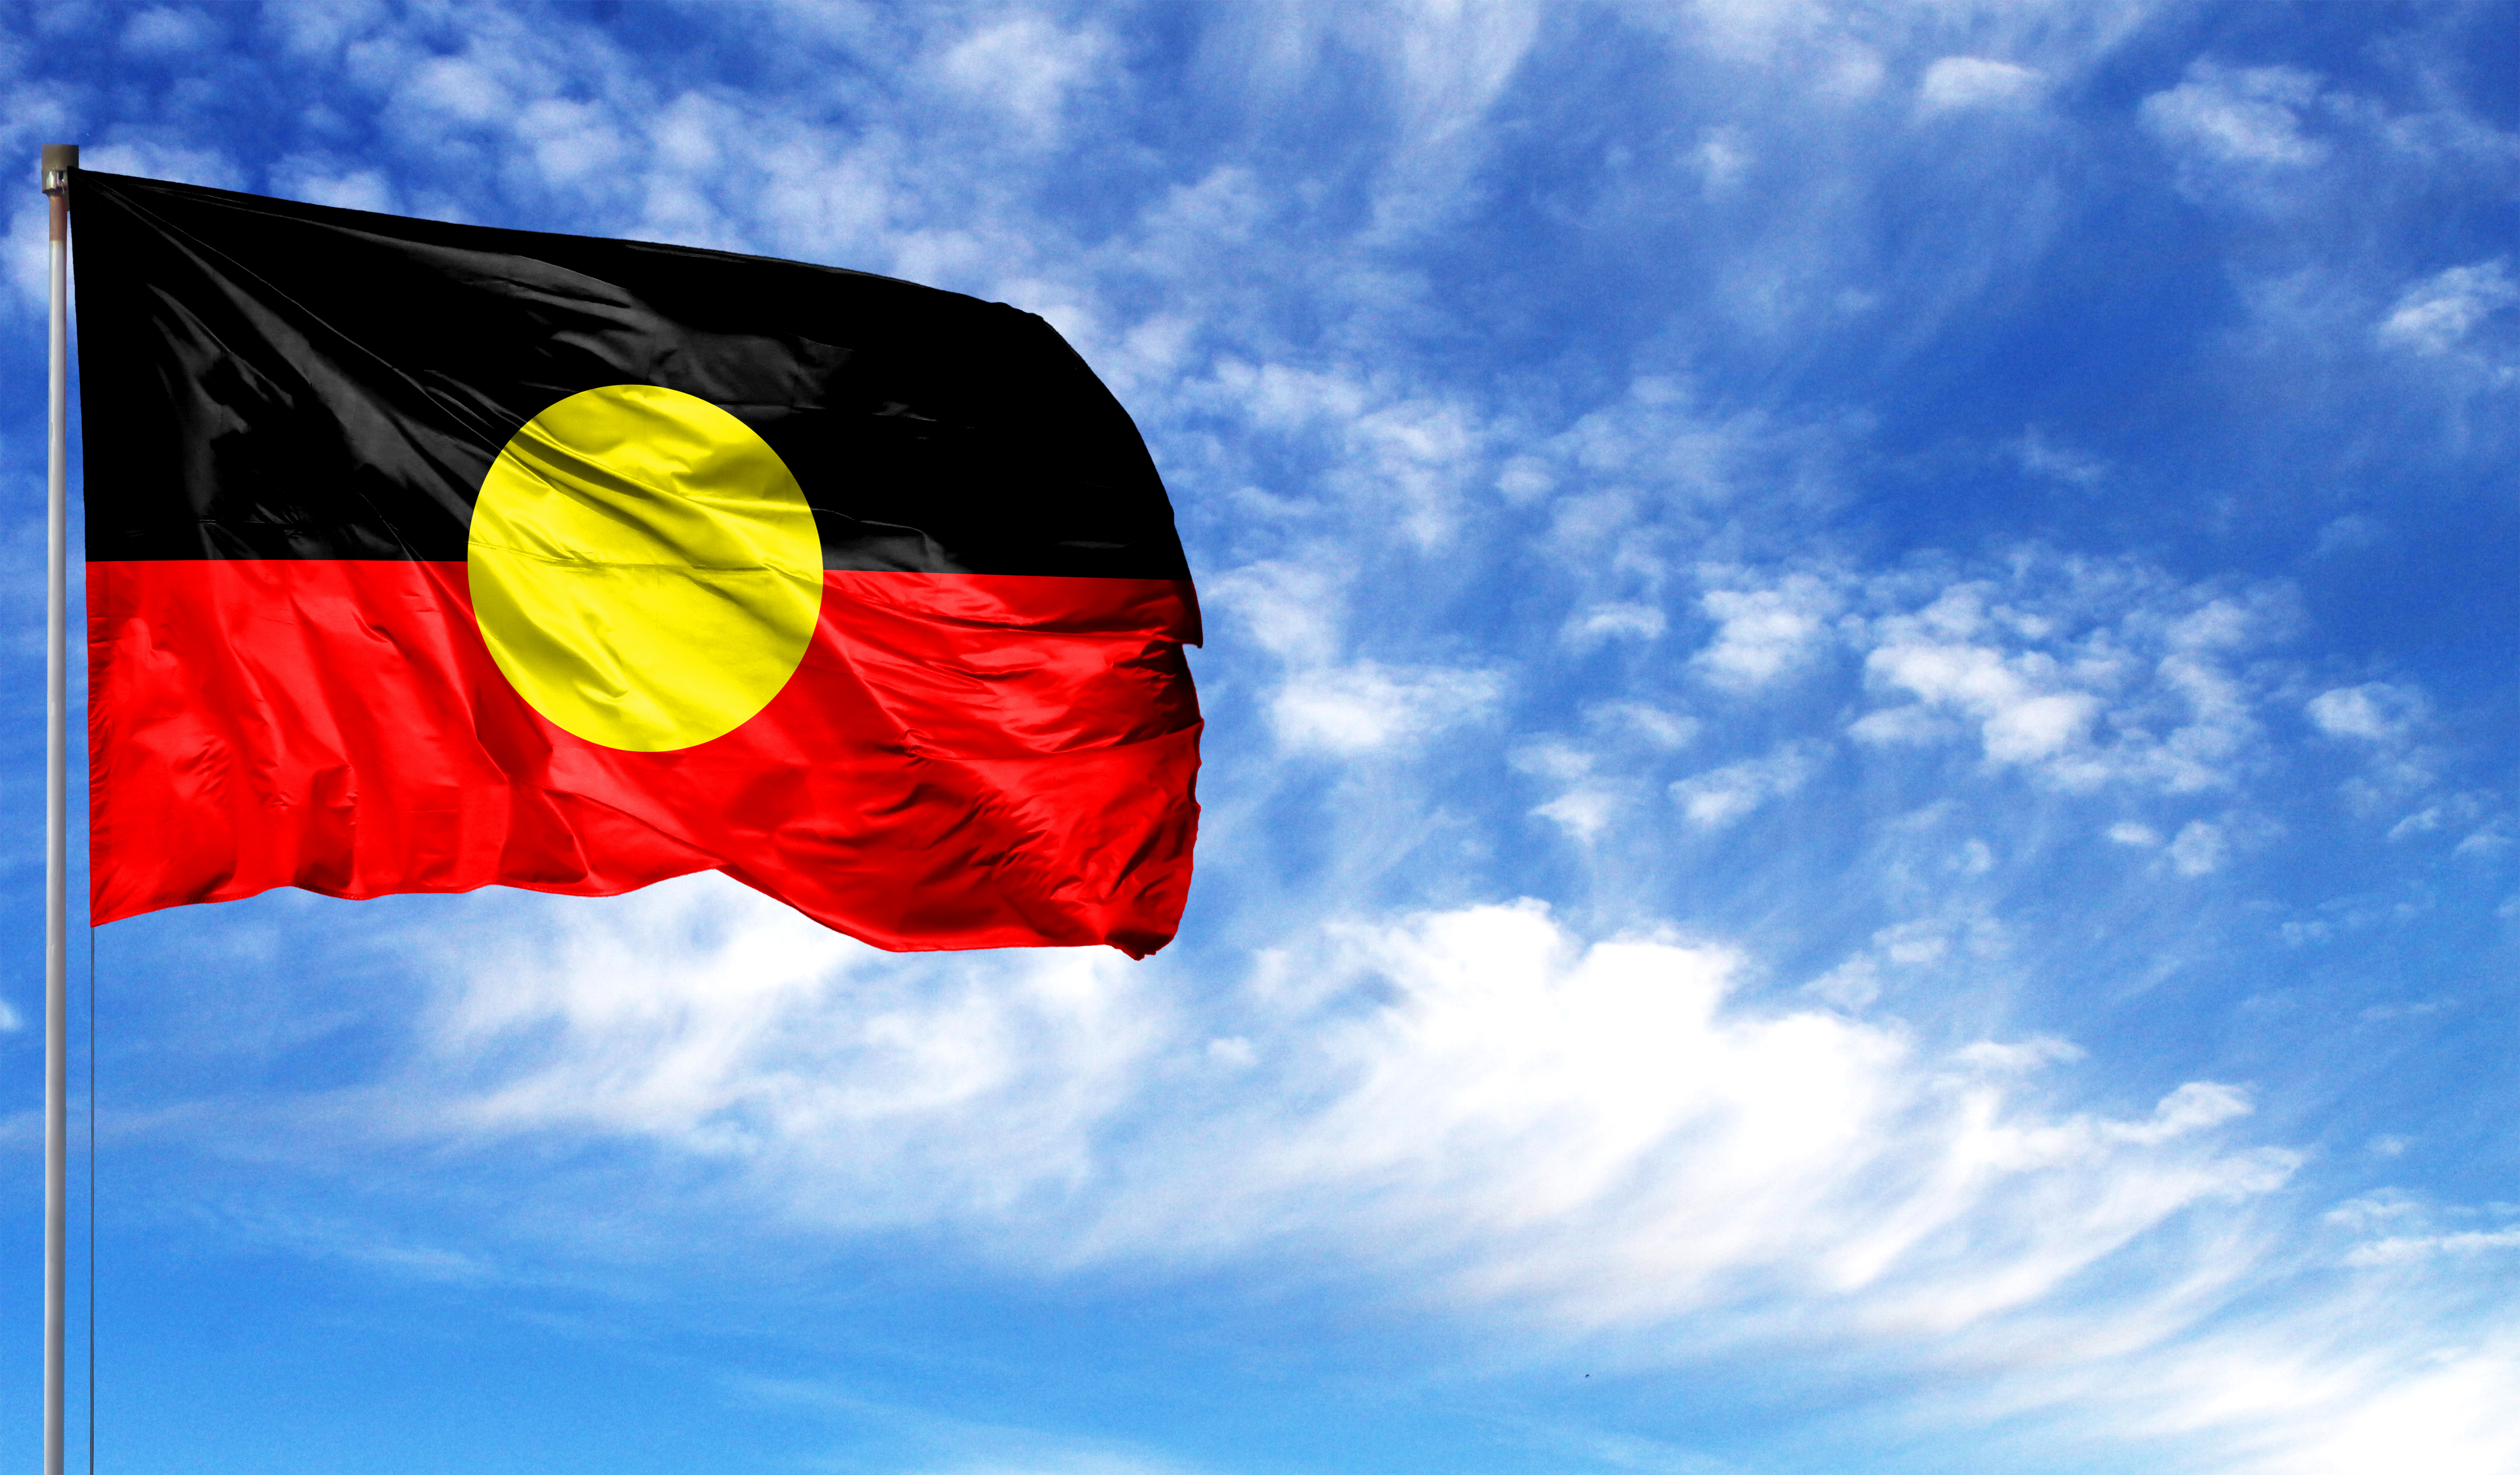 Image of the Indigenous Flag on a flag pole against a blue sky with some white clouds